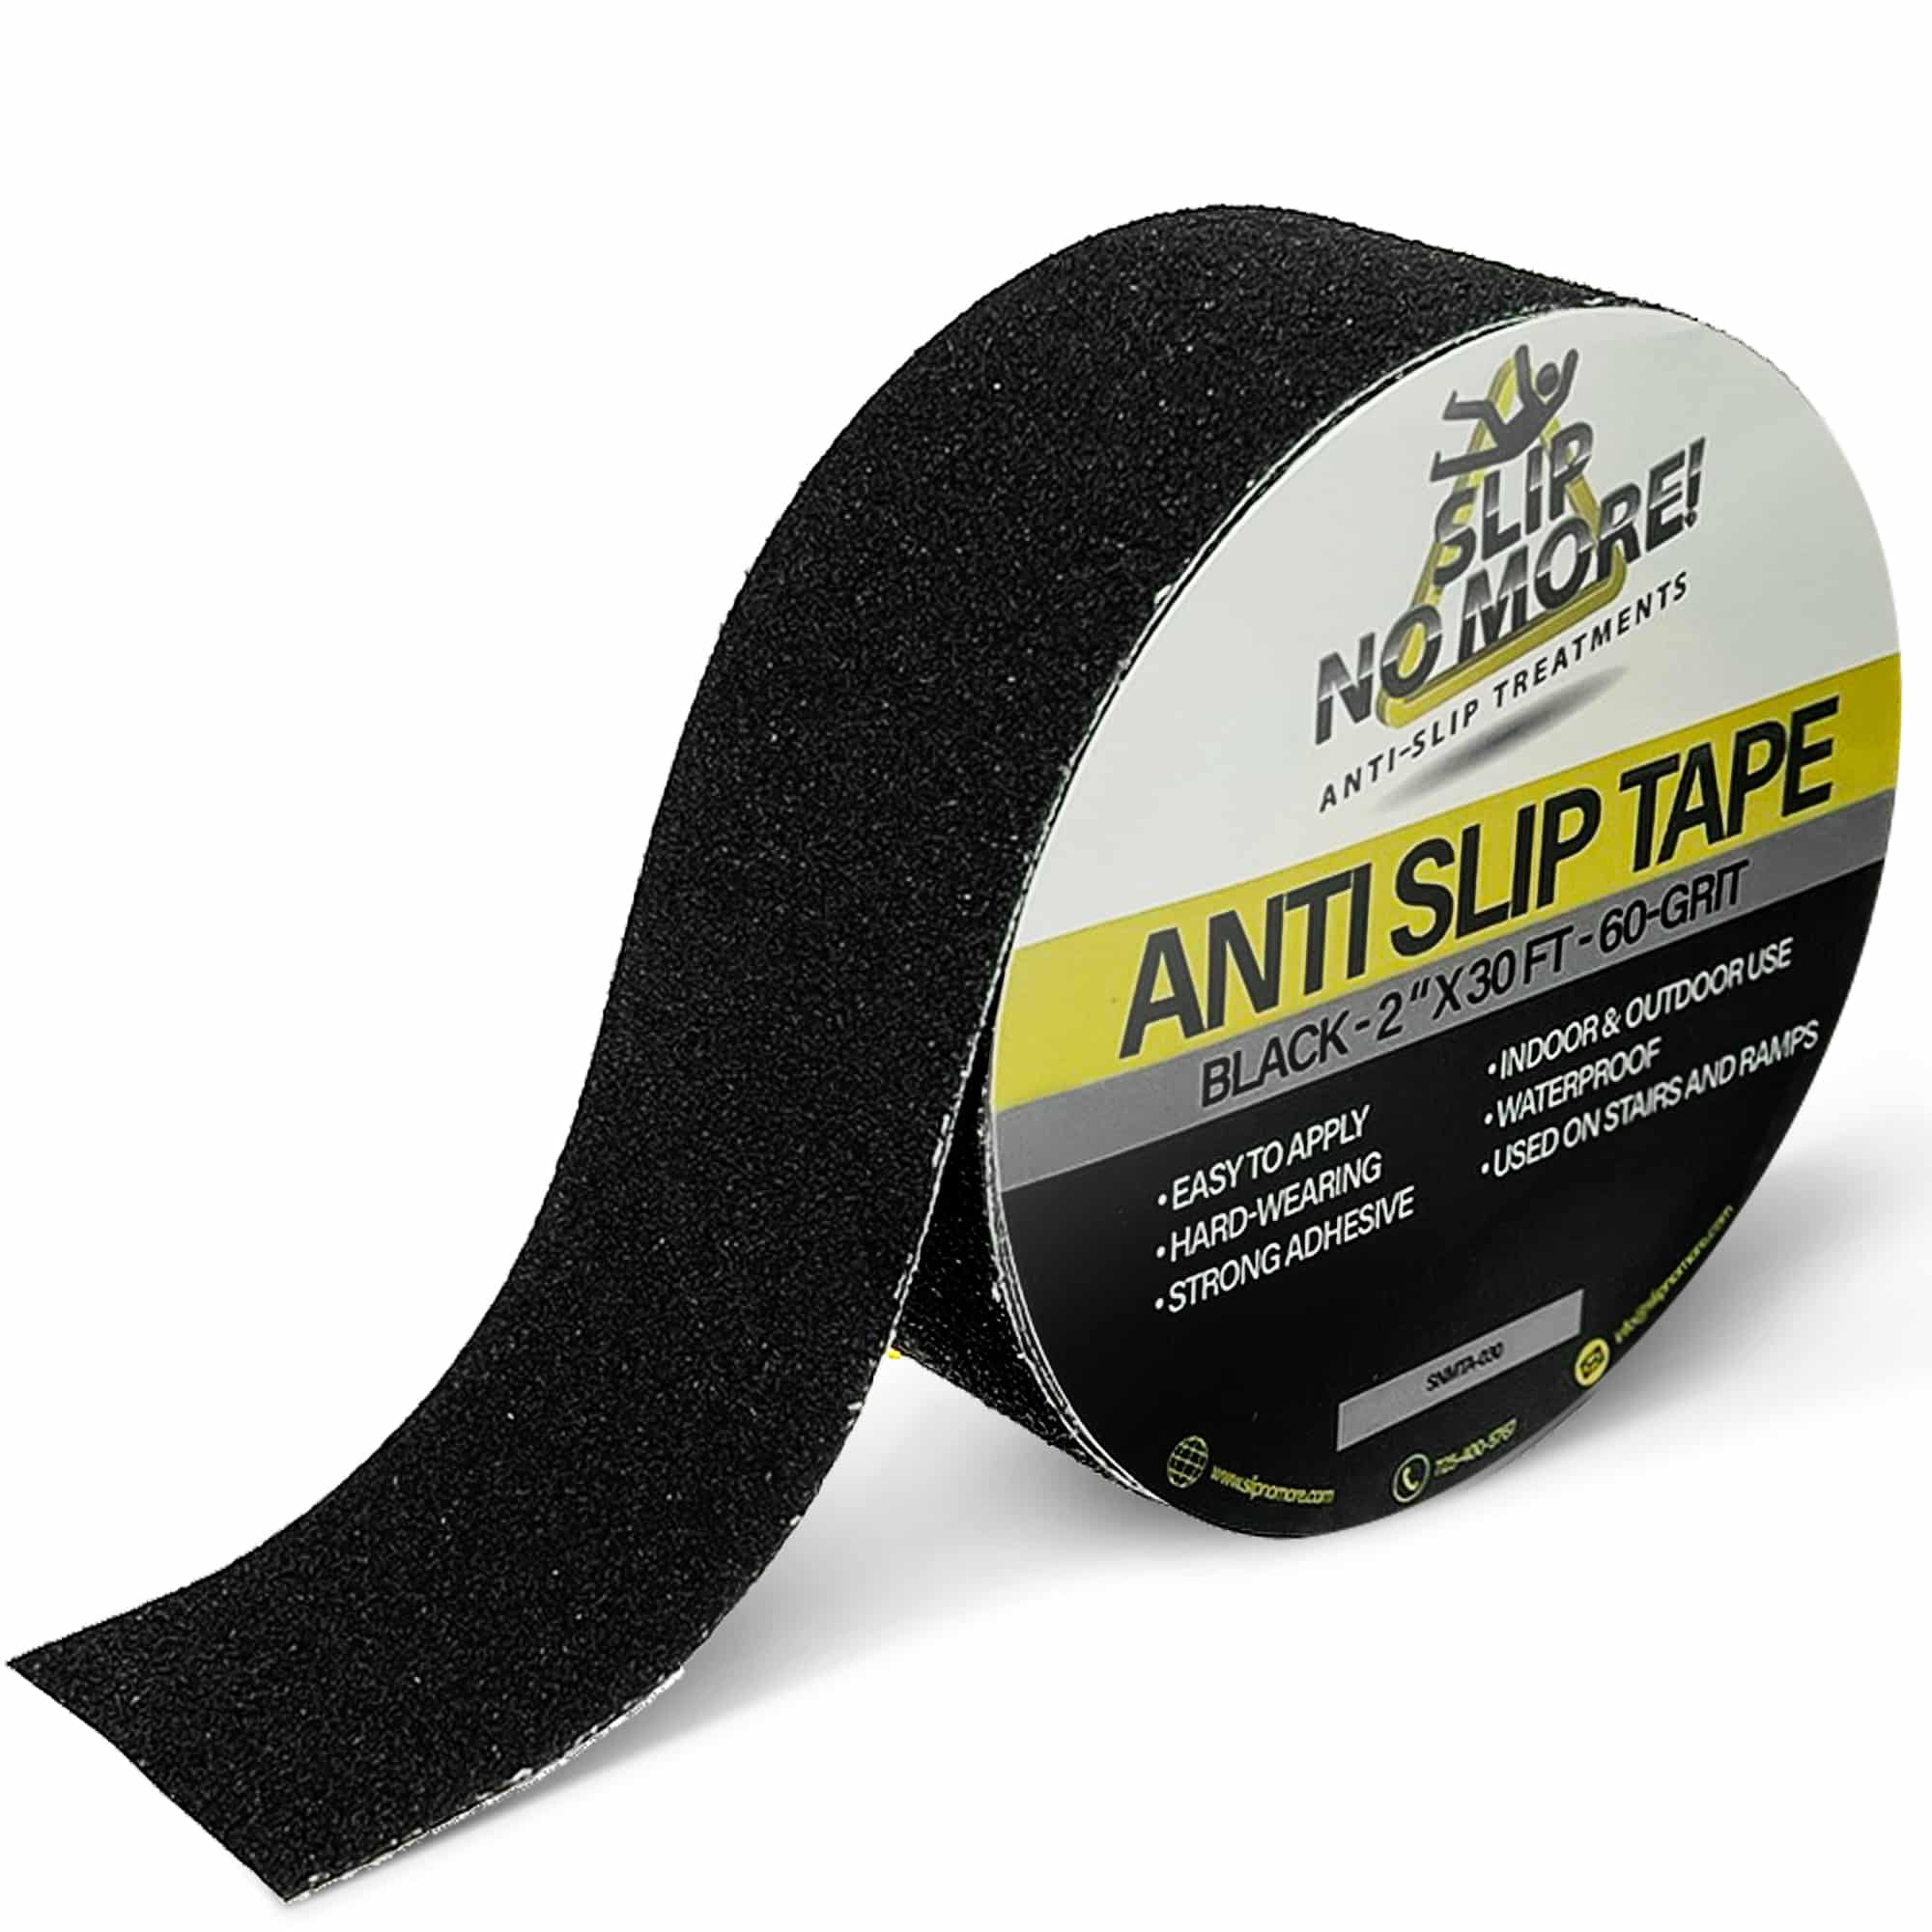 The Difference Between Anti-Slip And Non-Slip Treatment